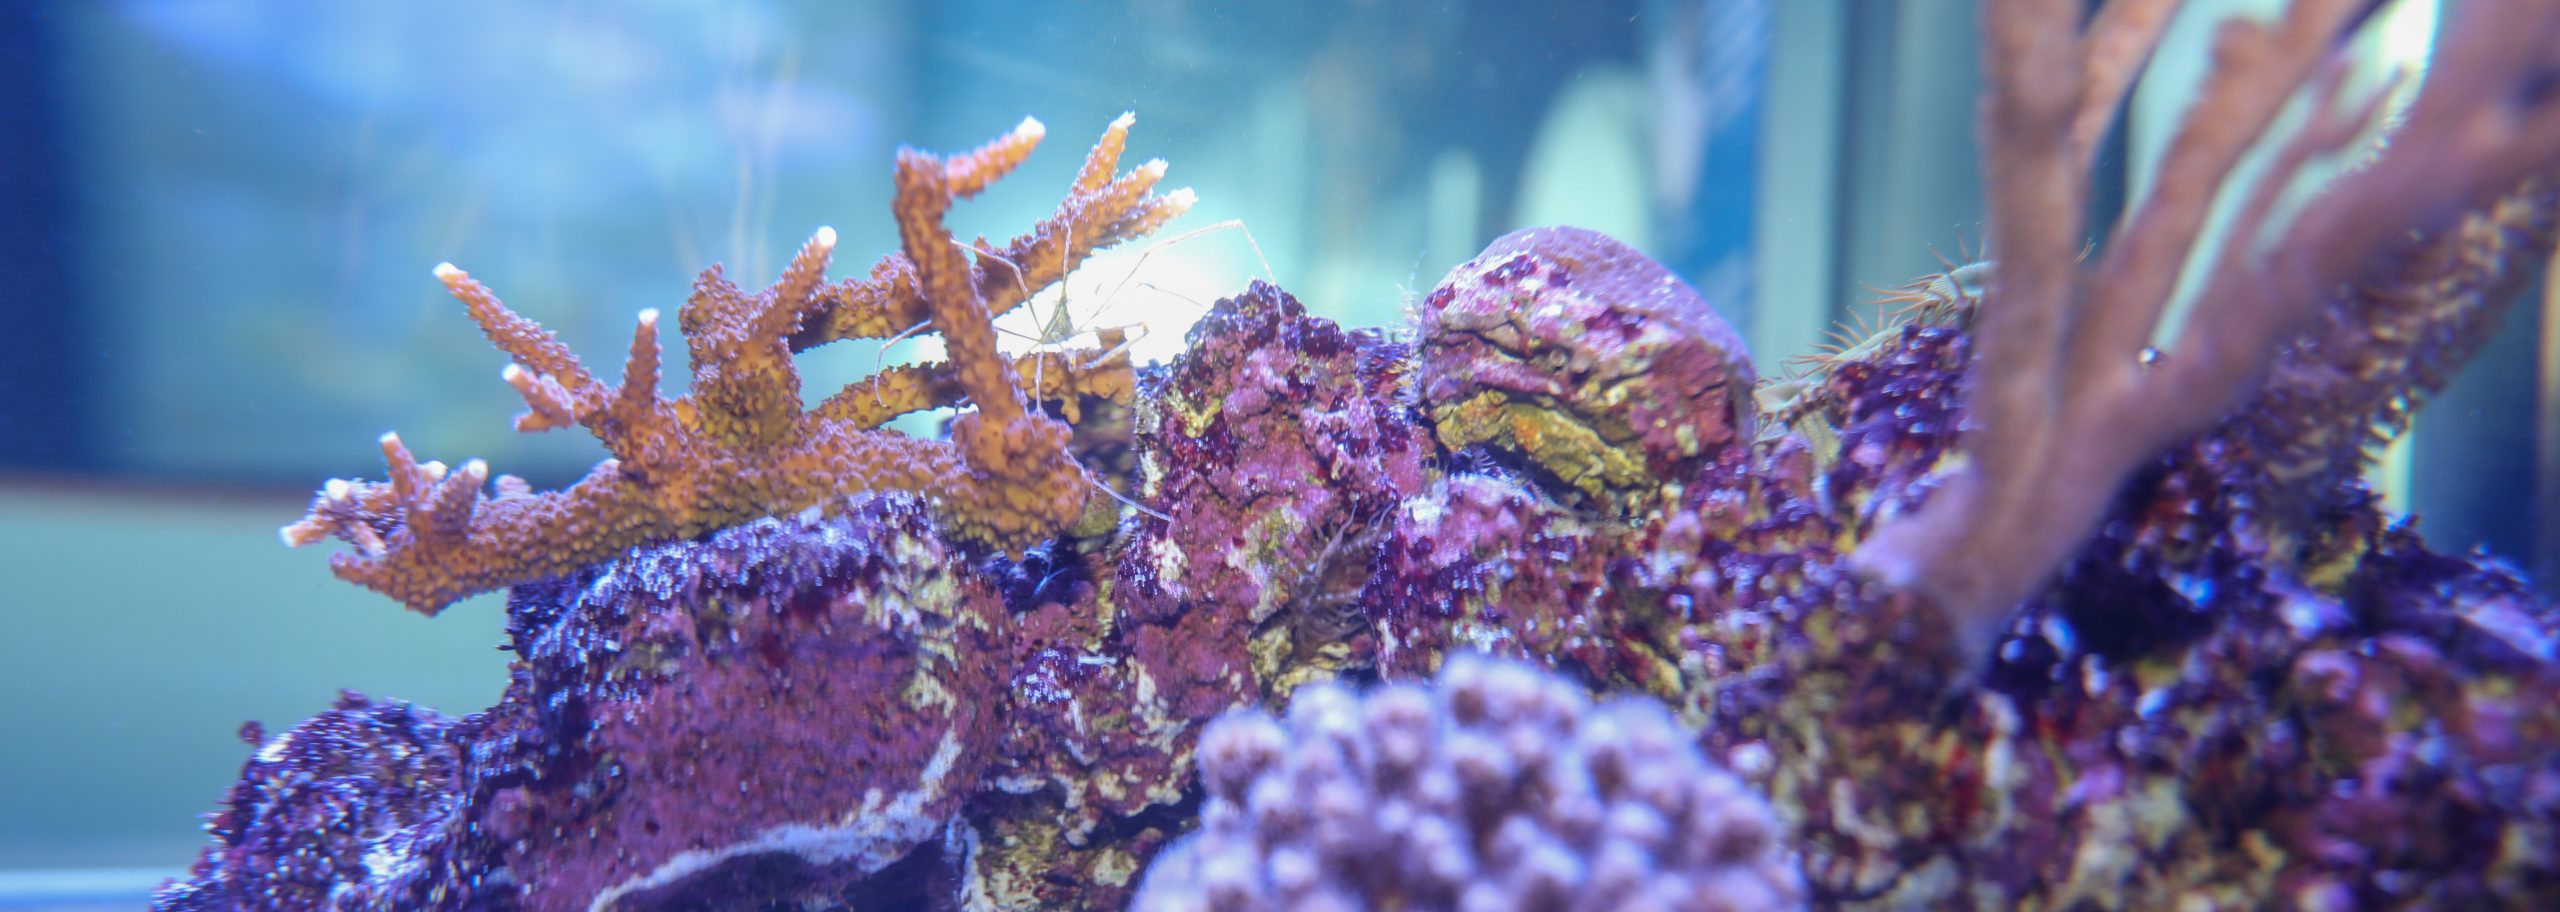 Staghorn Coral: An Endangered Species at the Aquarium - New